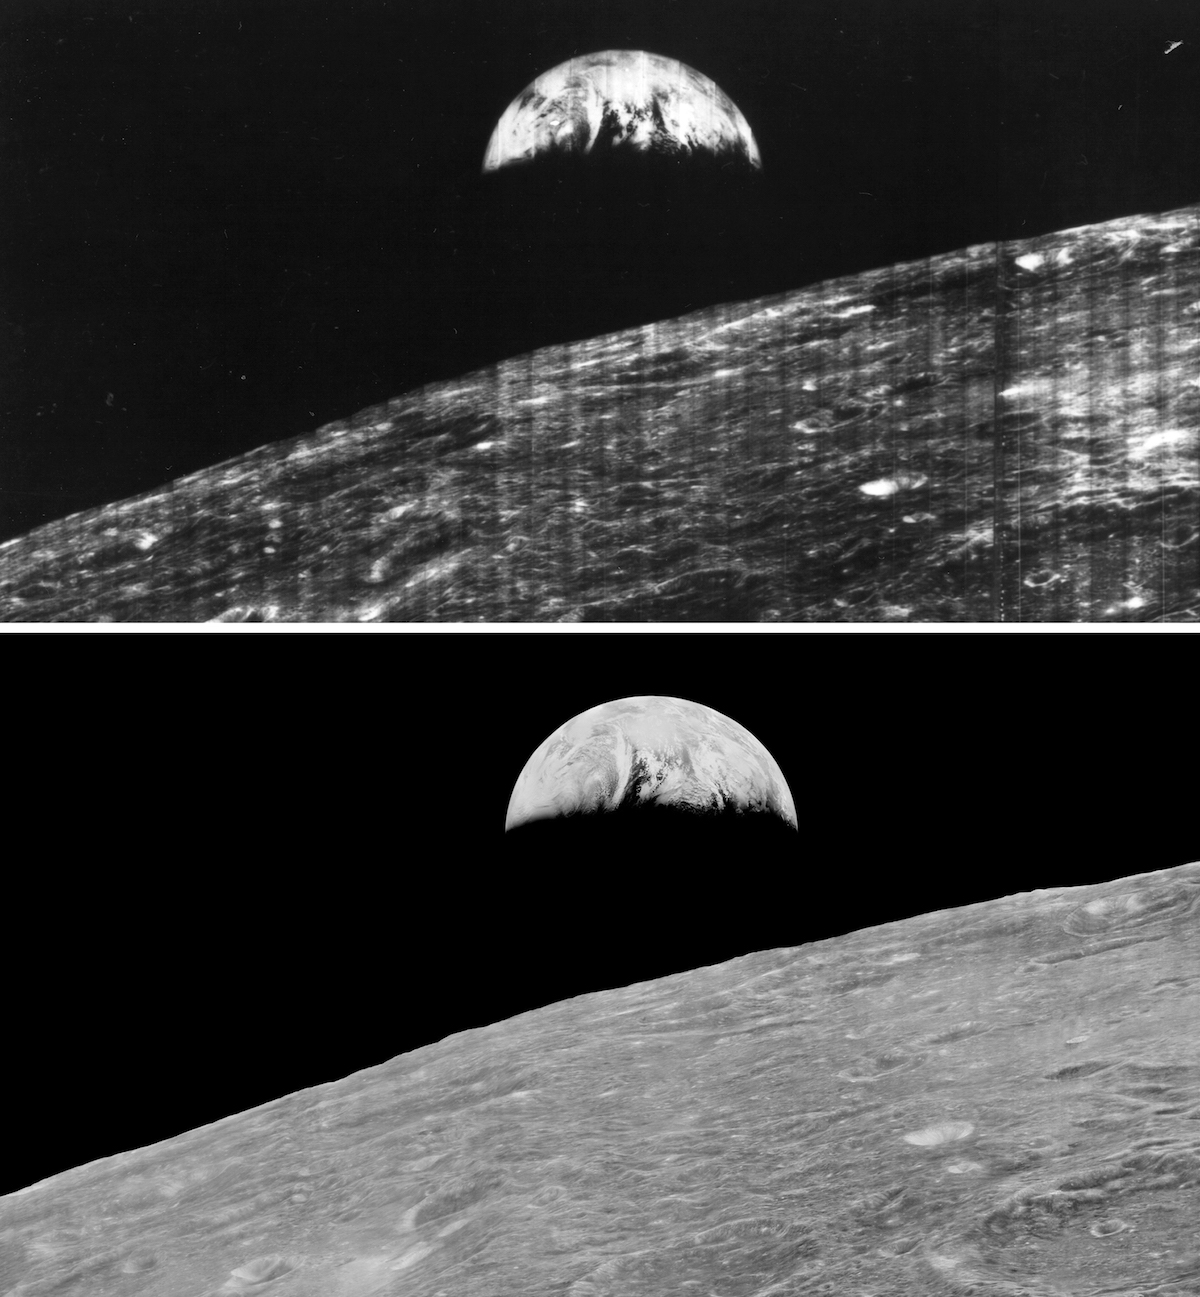 Earth rising over lunar horizon in two images: the grainy original and the smoother, restored version.